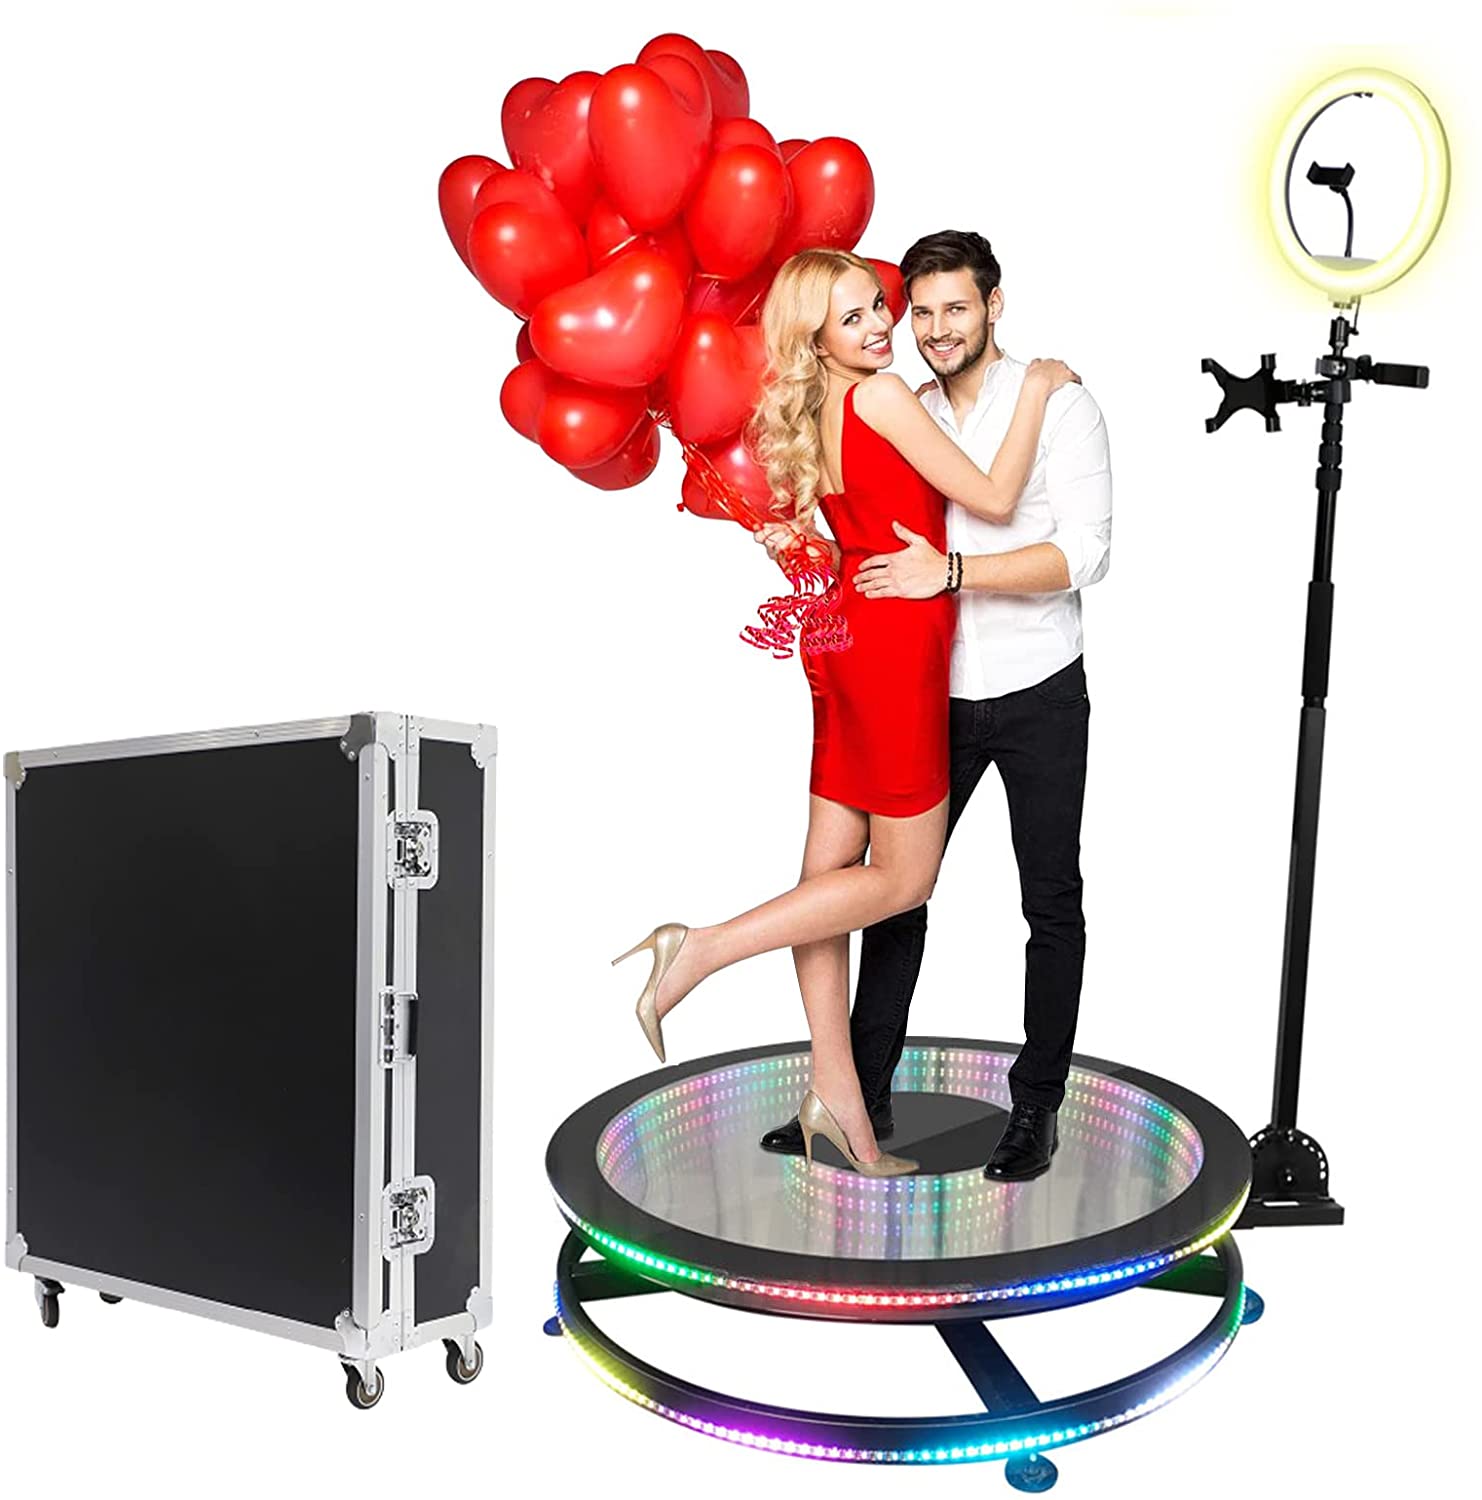 Spot transportable photo booth products at the parties.